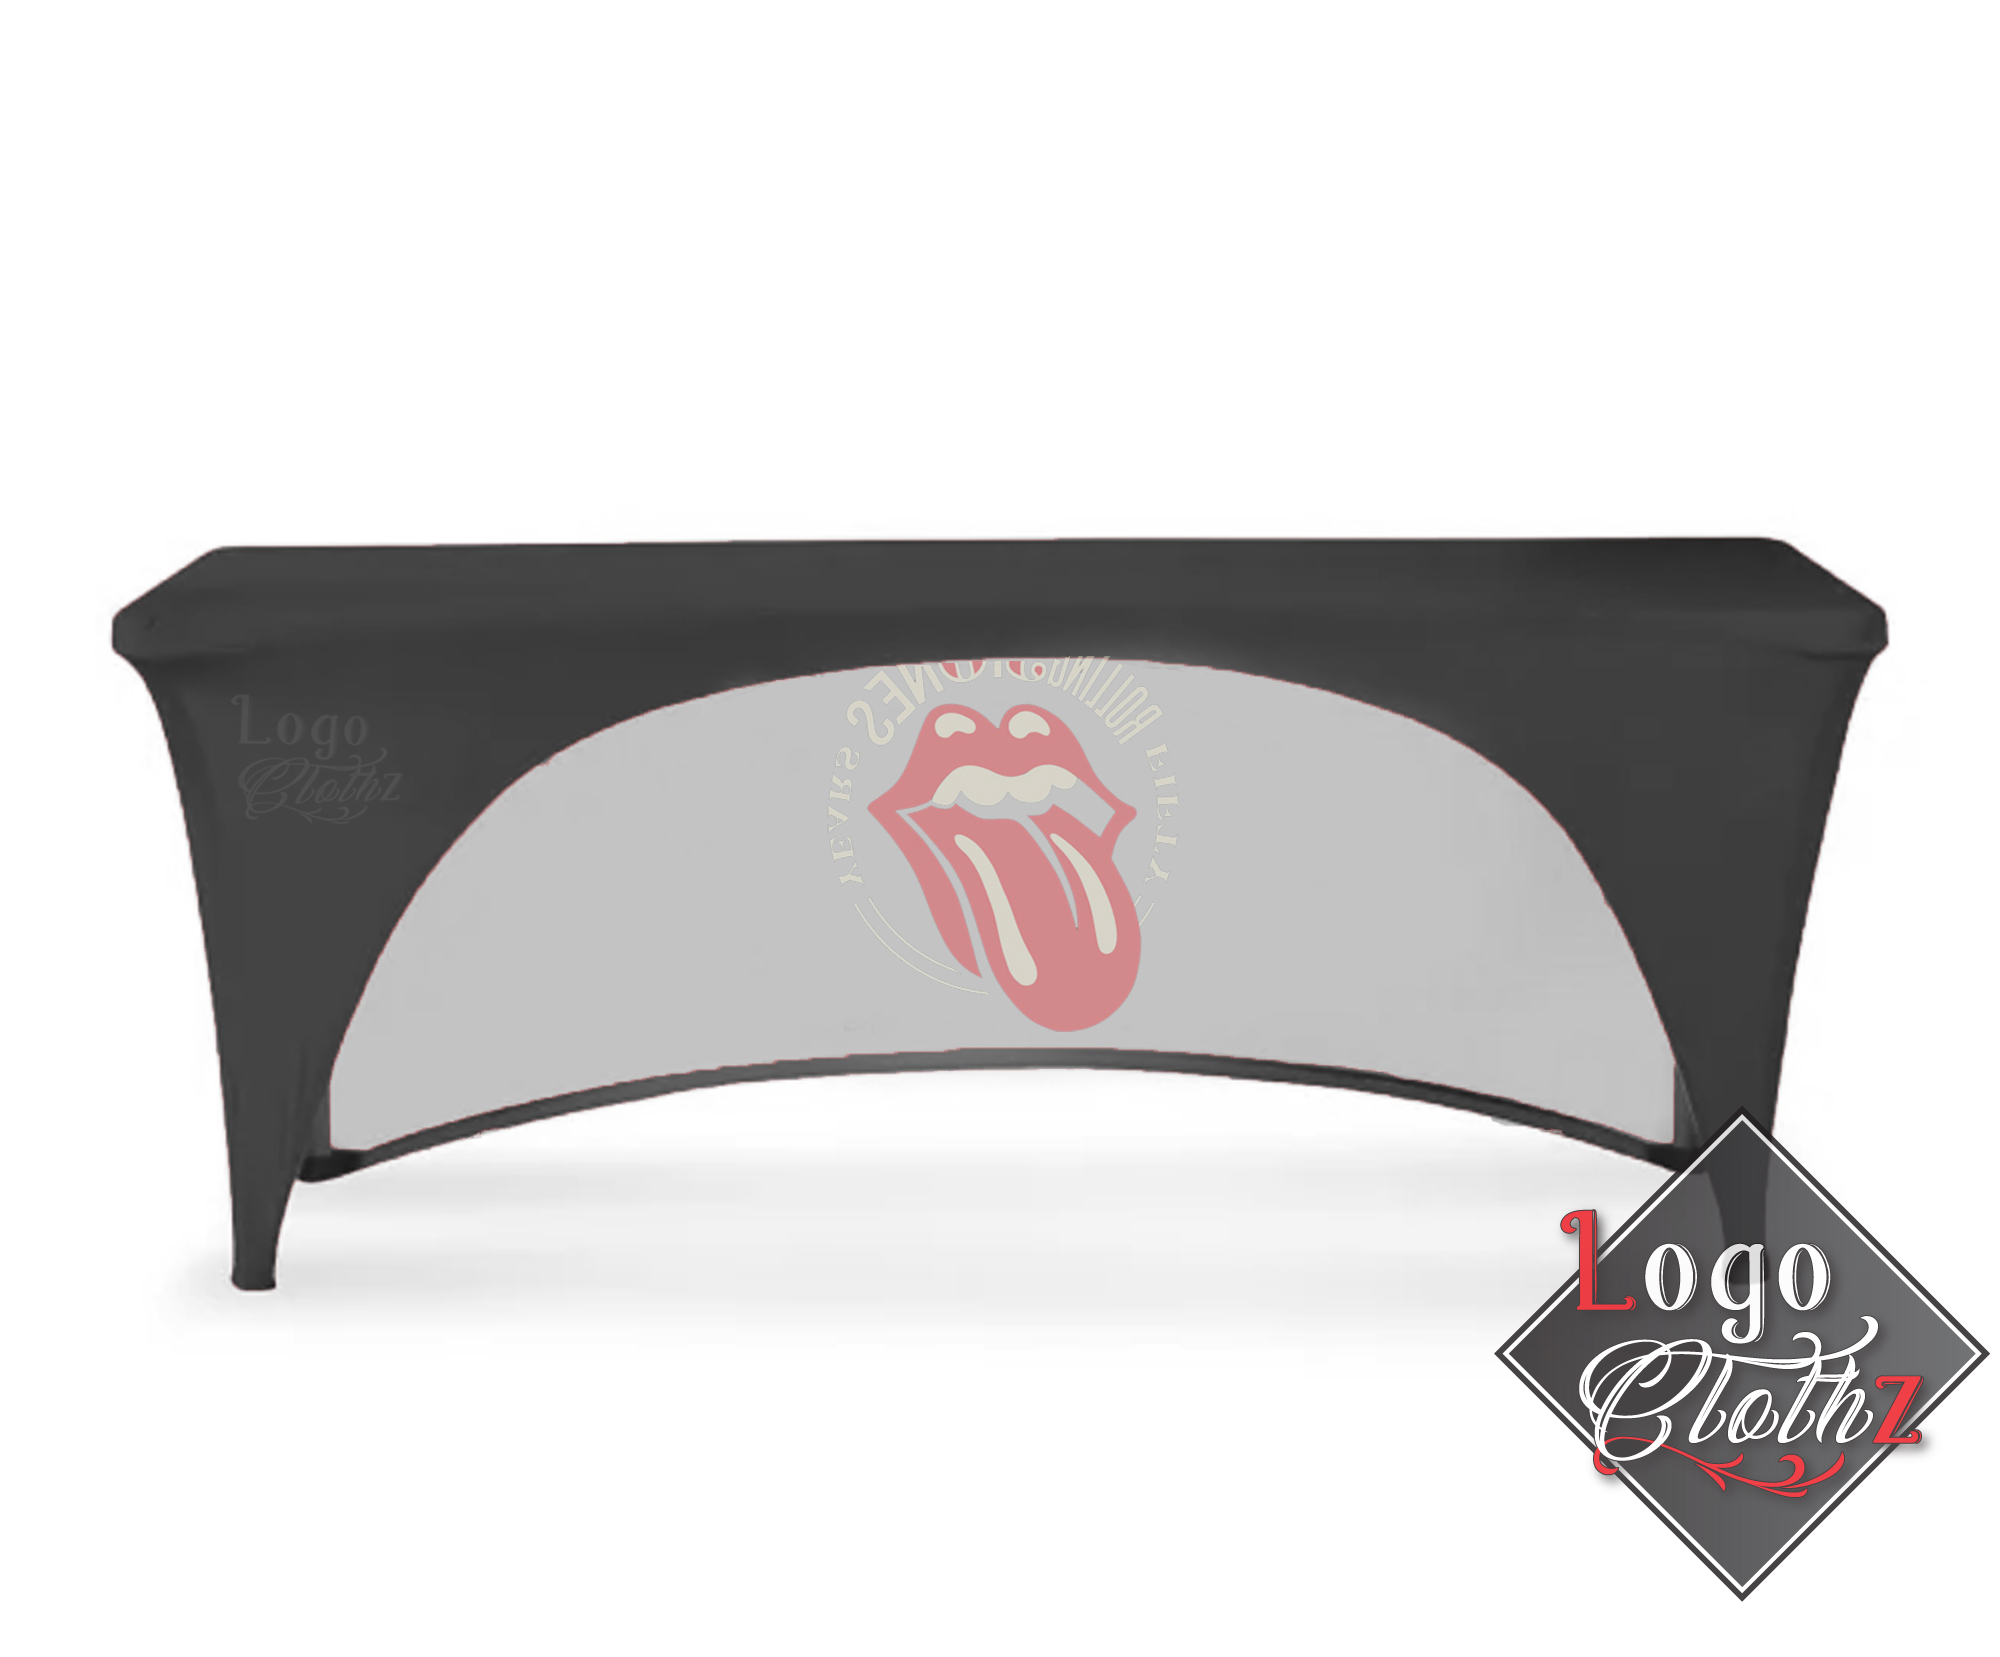 3-sided-spandex-table-cover-with-logo-print.jpg